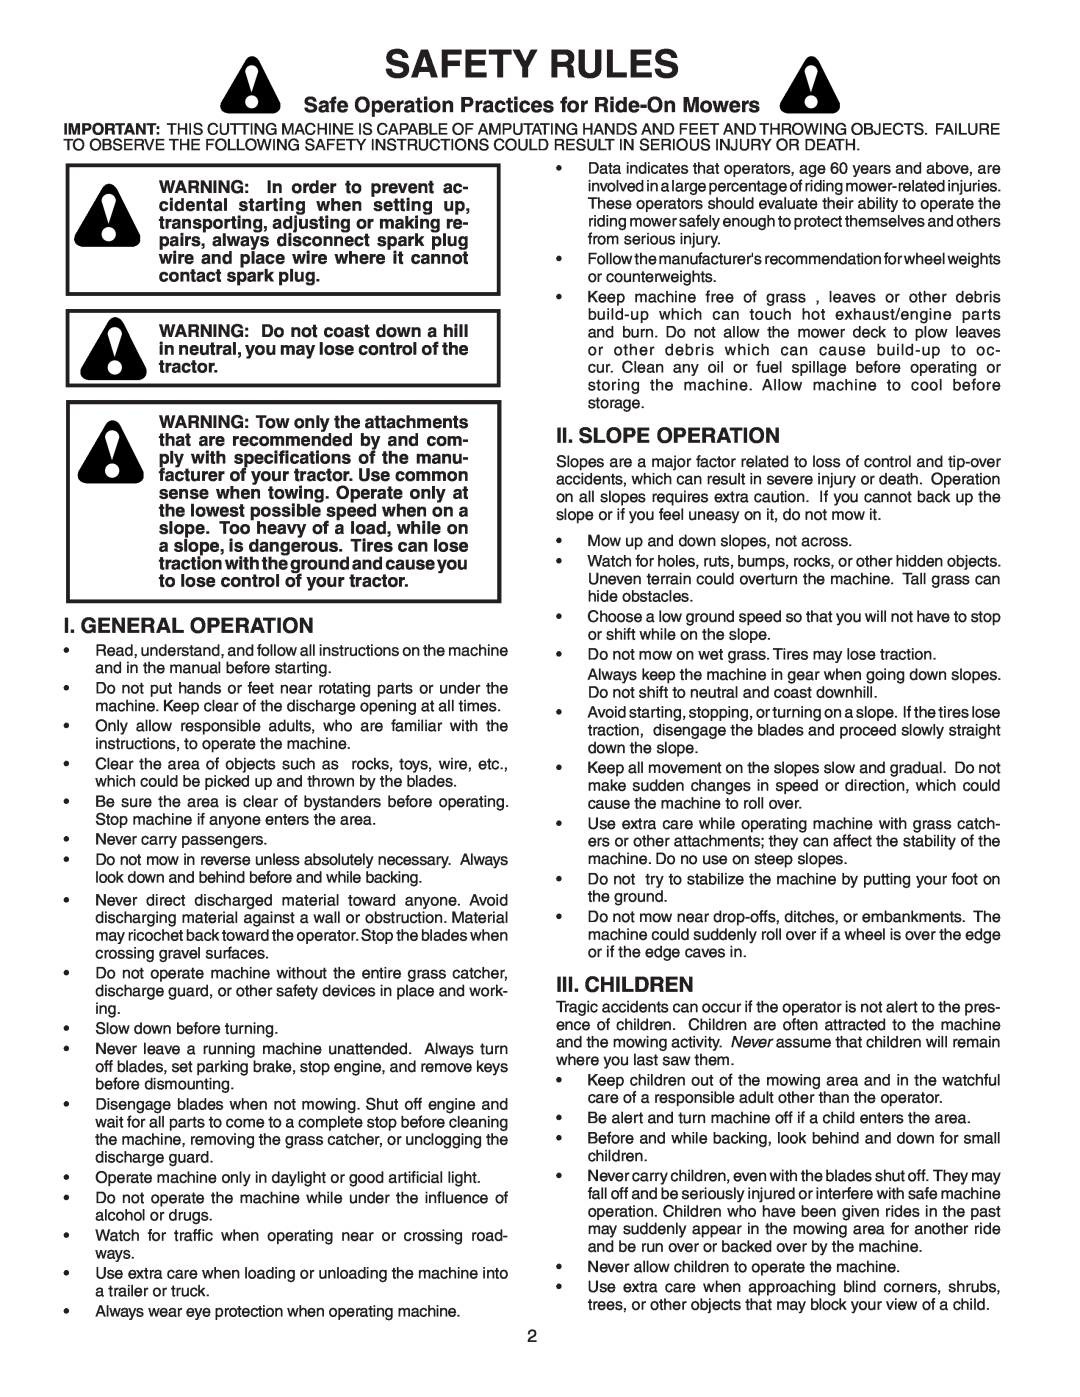 Poulan 960 72 00-11 Safety Rules, Safe Operation Practices for Ride-On Mowers, I. General Operation, Ii. Slope Operation 